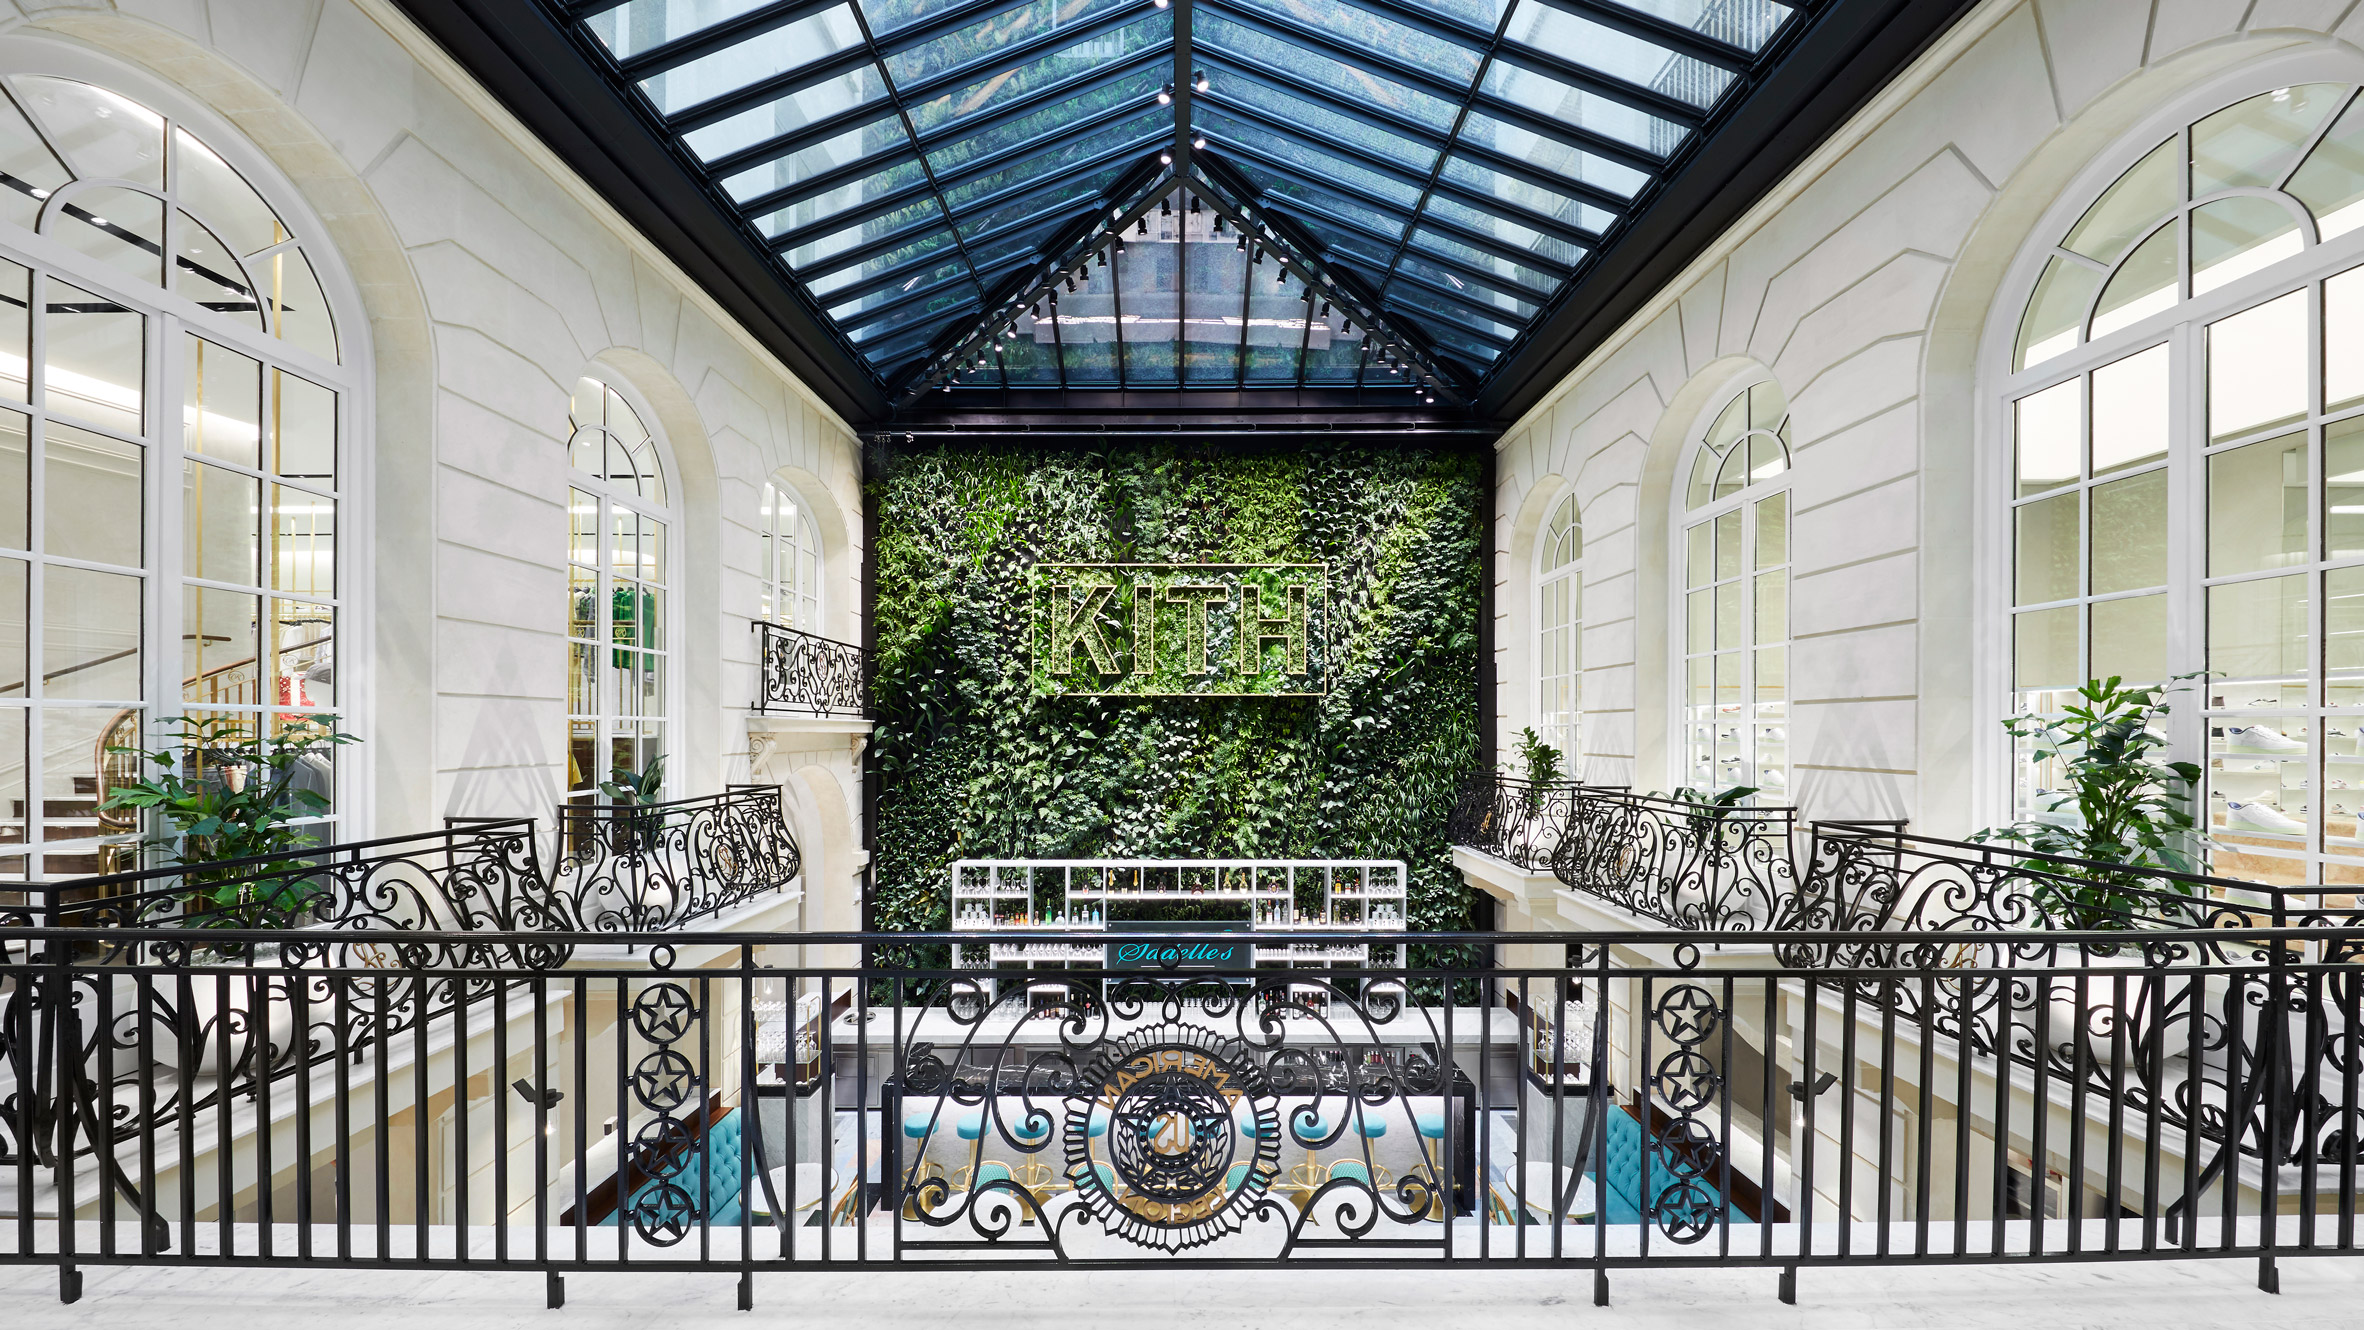 Kith Paris courtyard with green wall